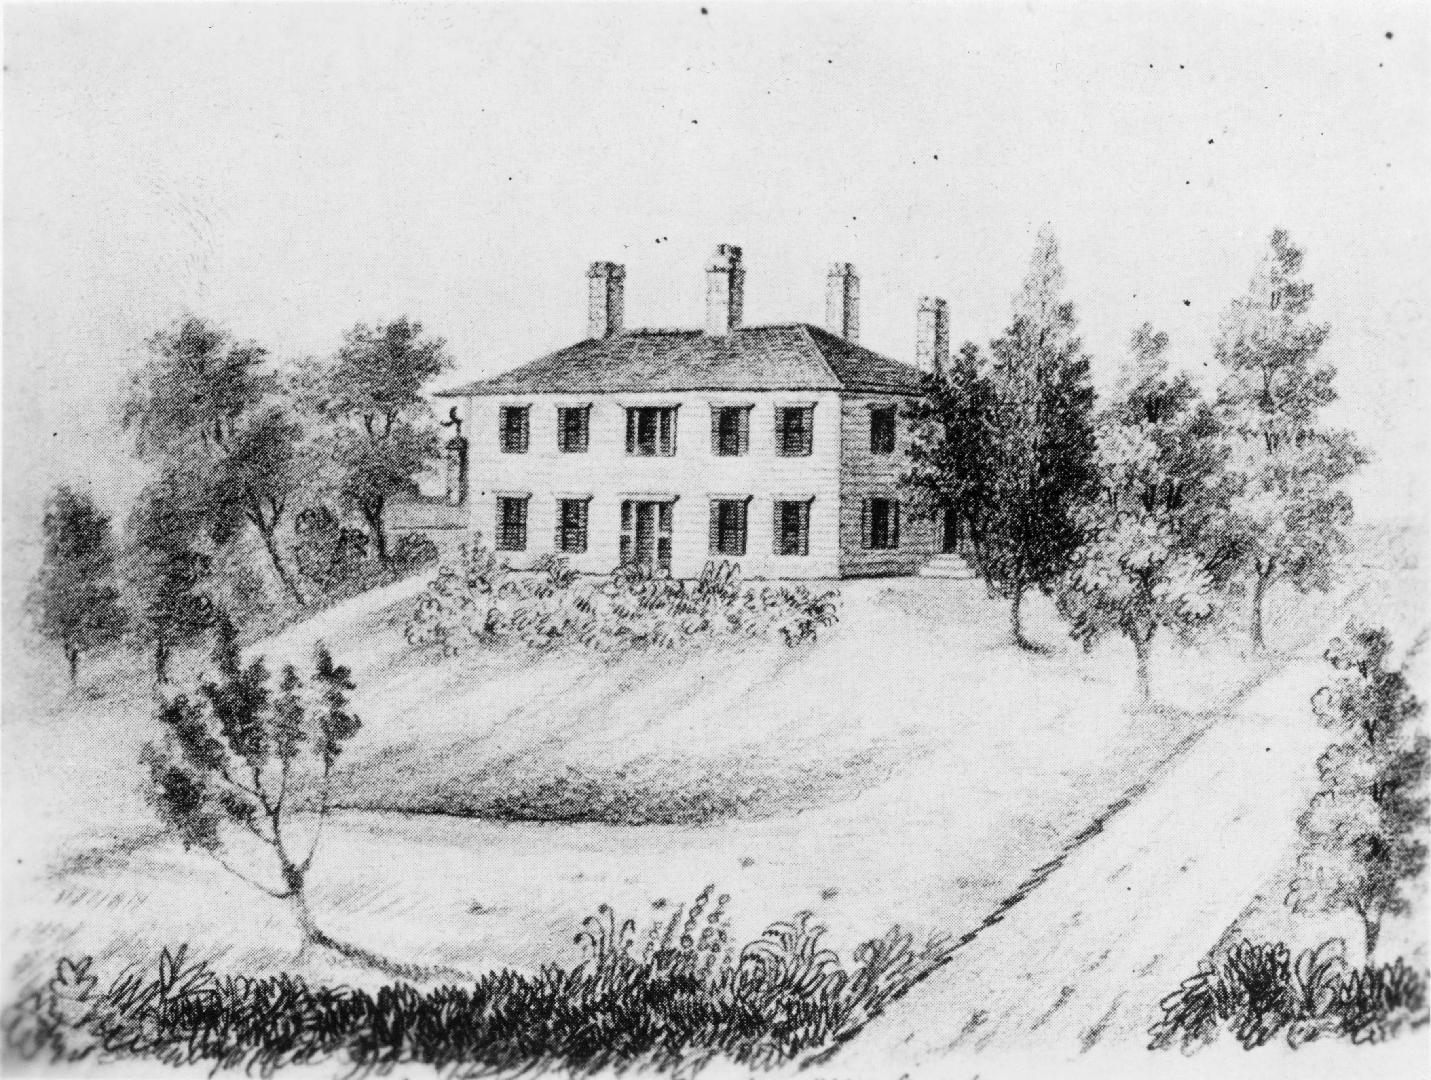 Government House (1815-1860), Simcoe St